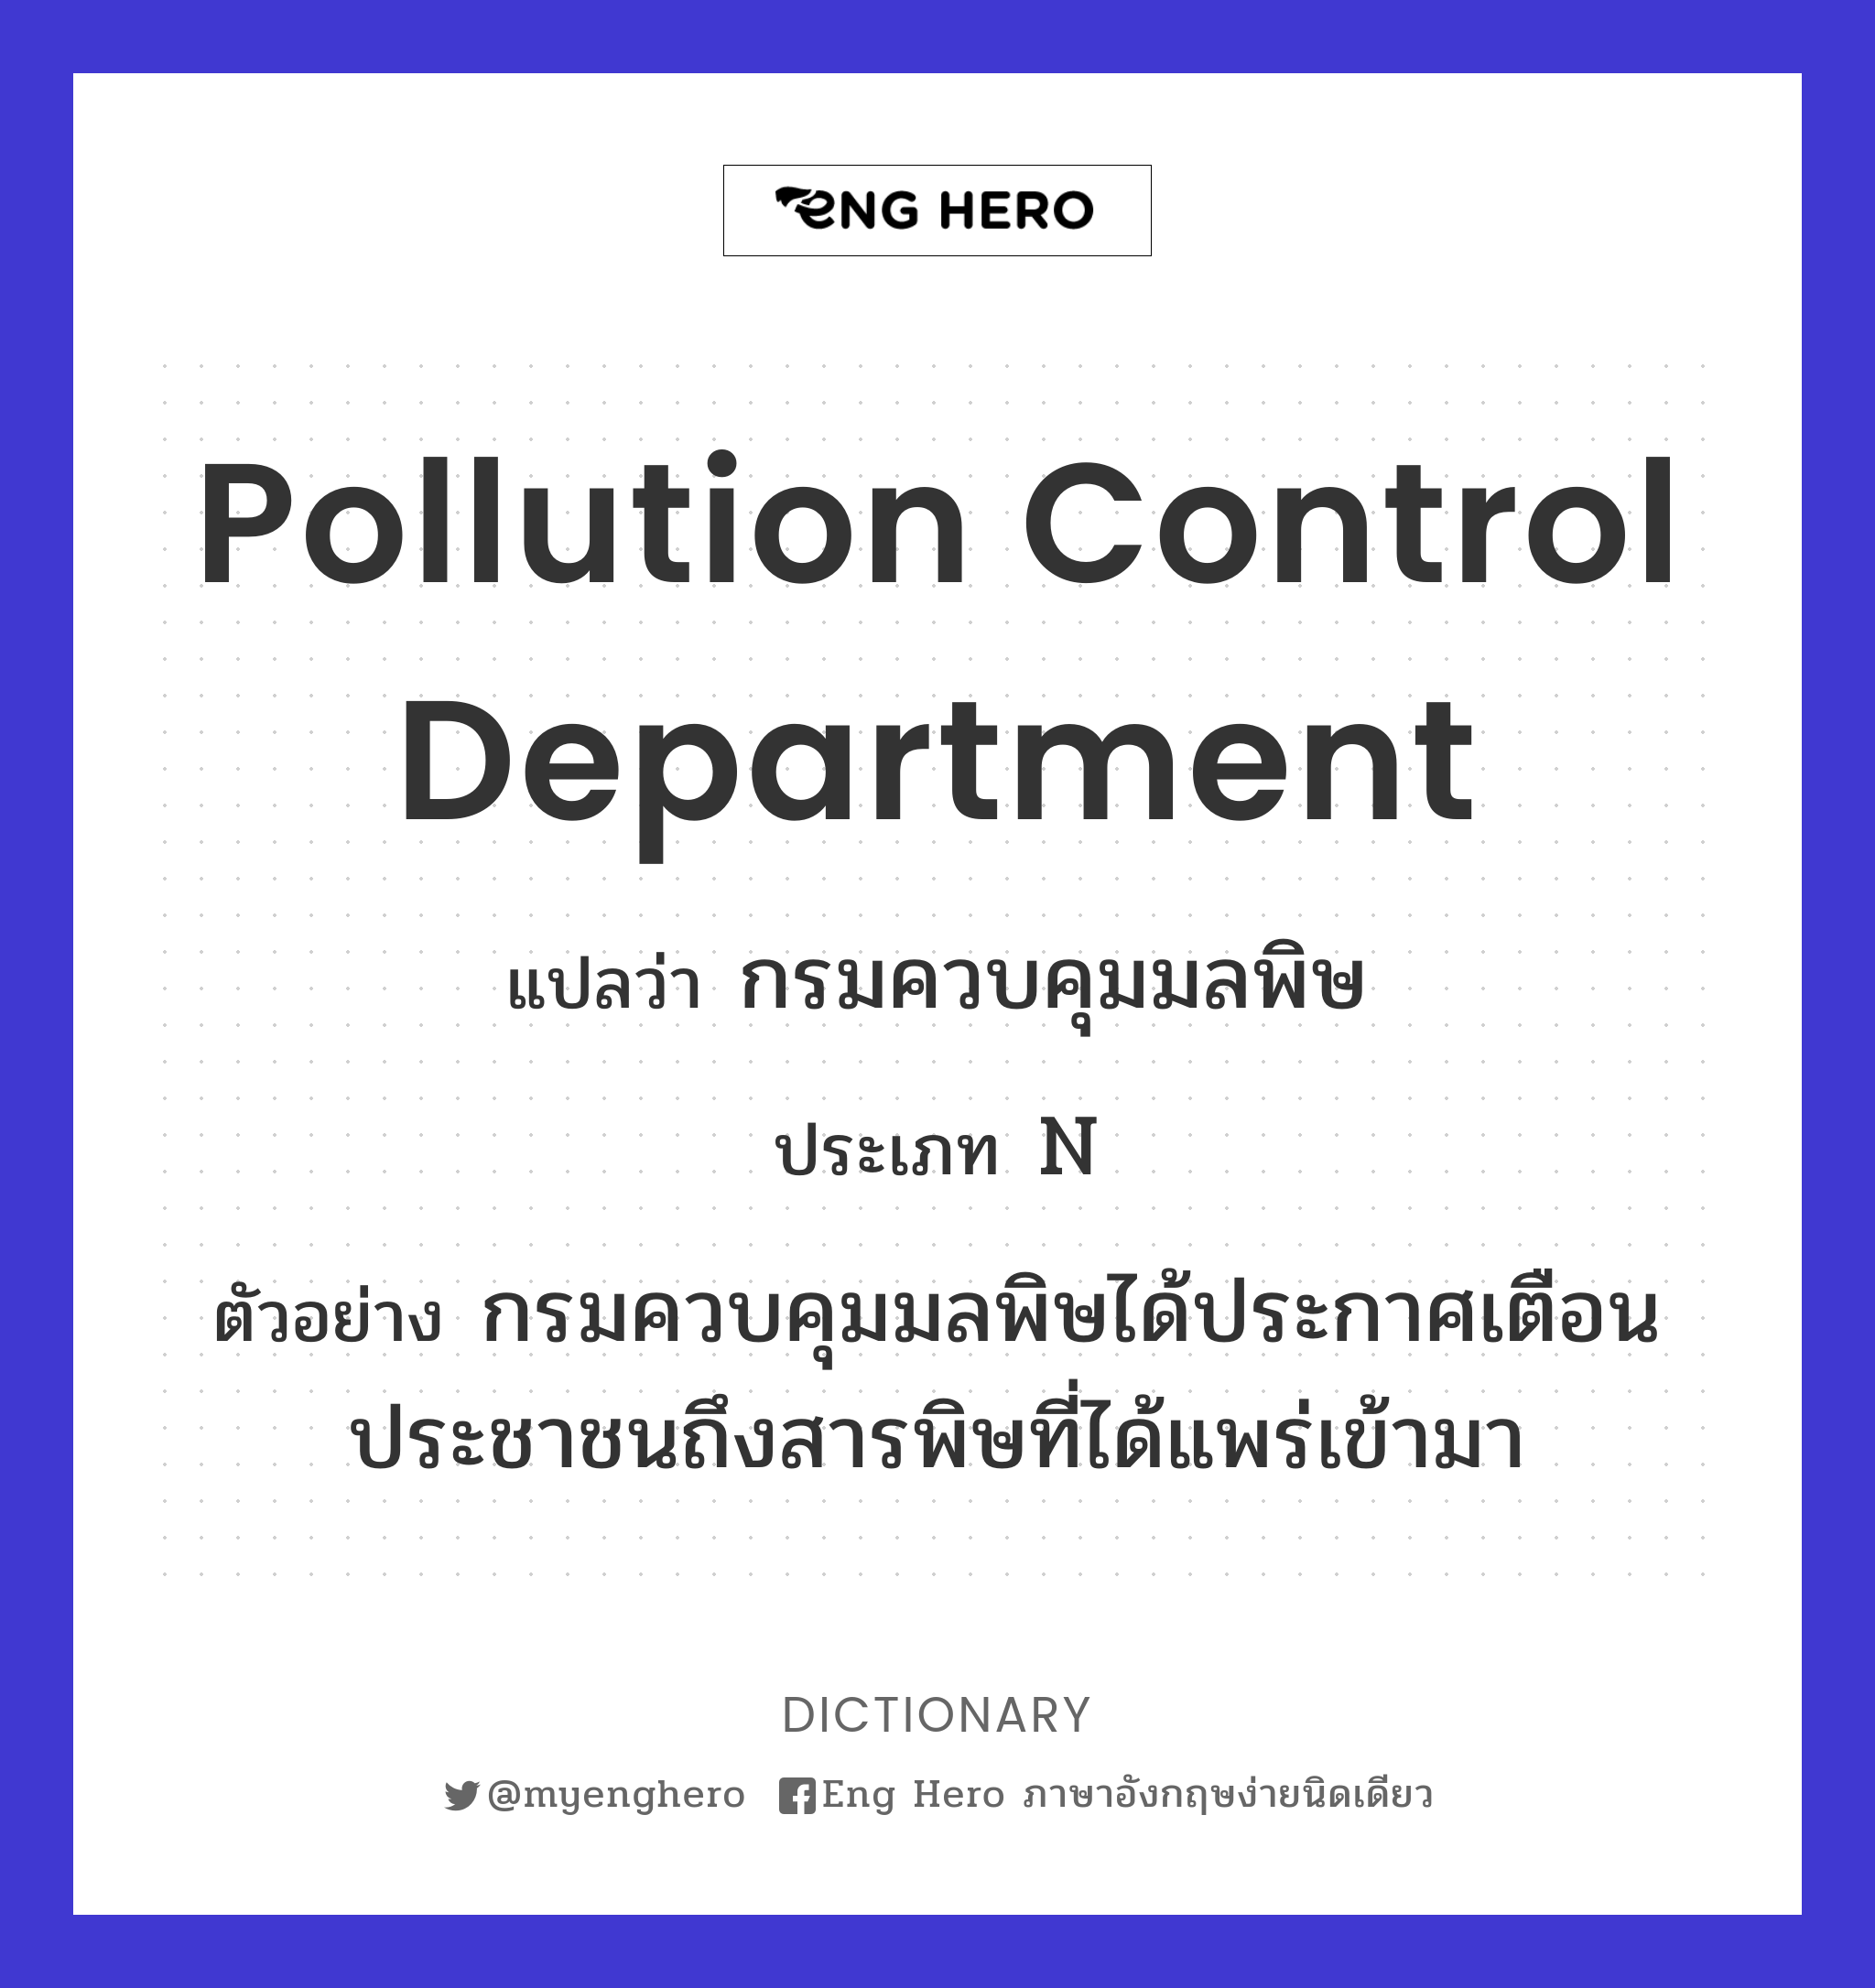 Pollution Control Department